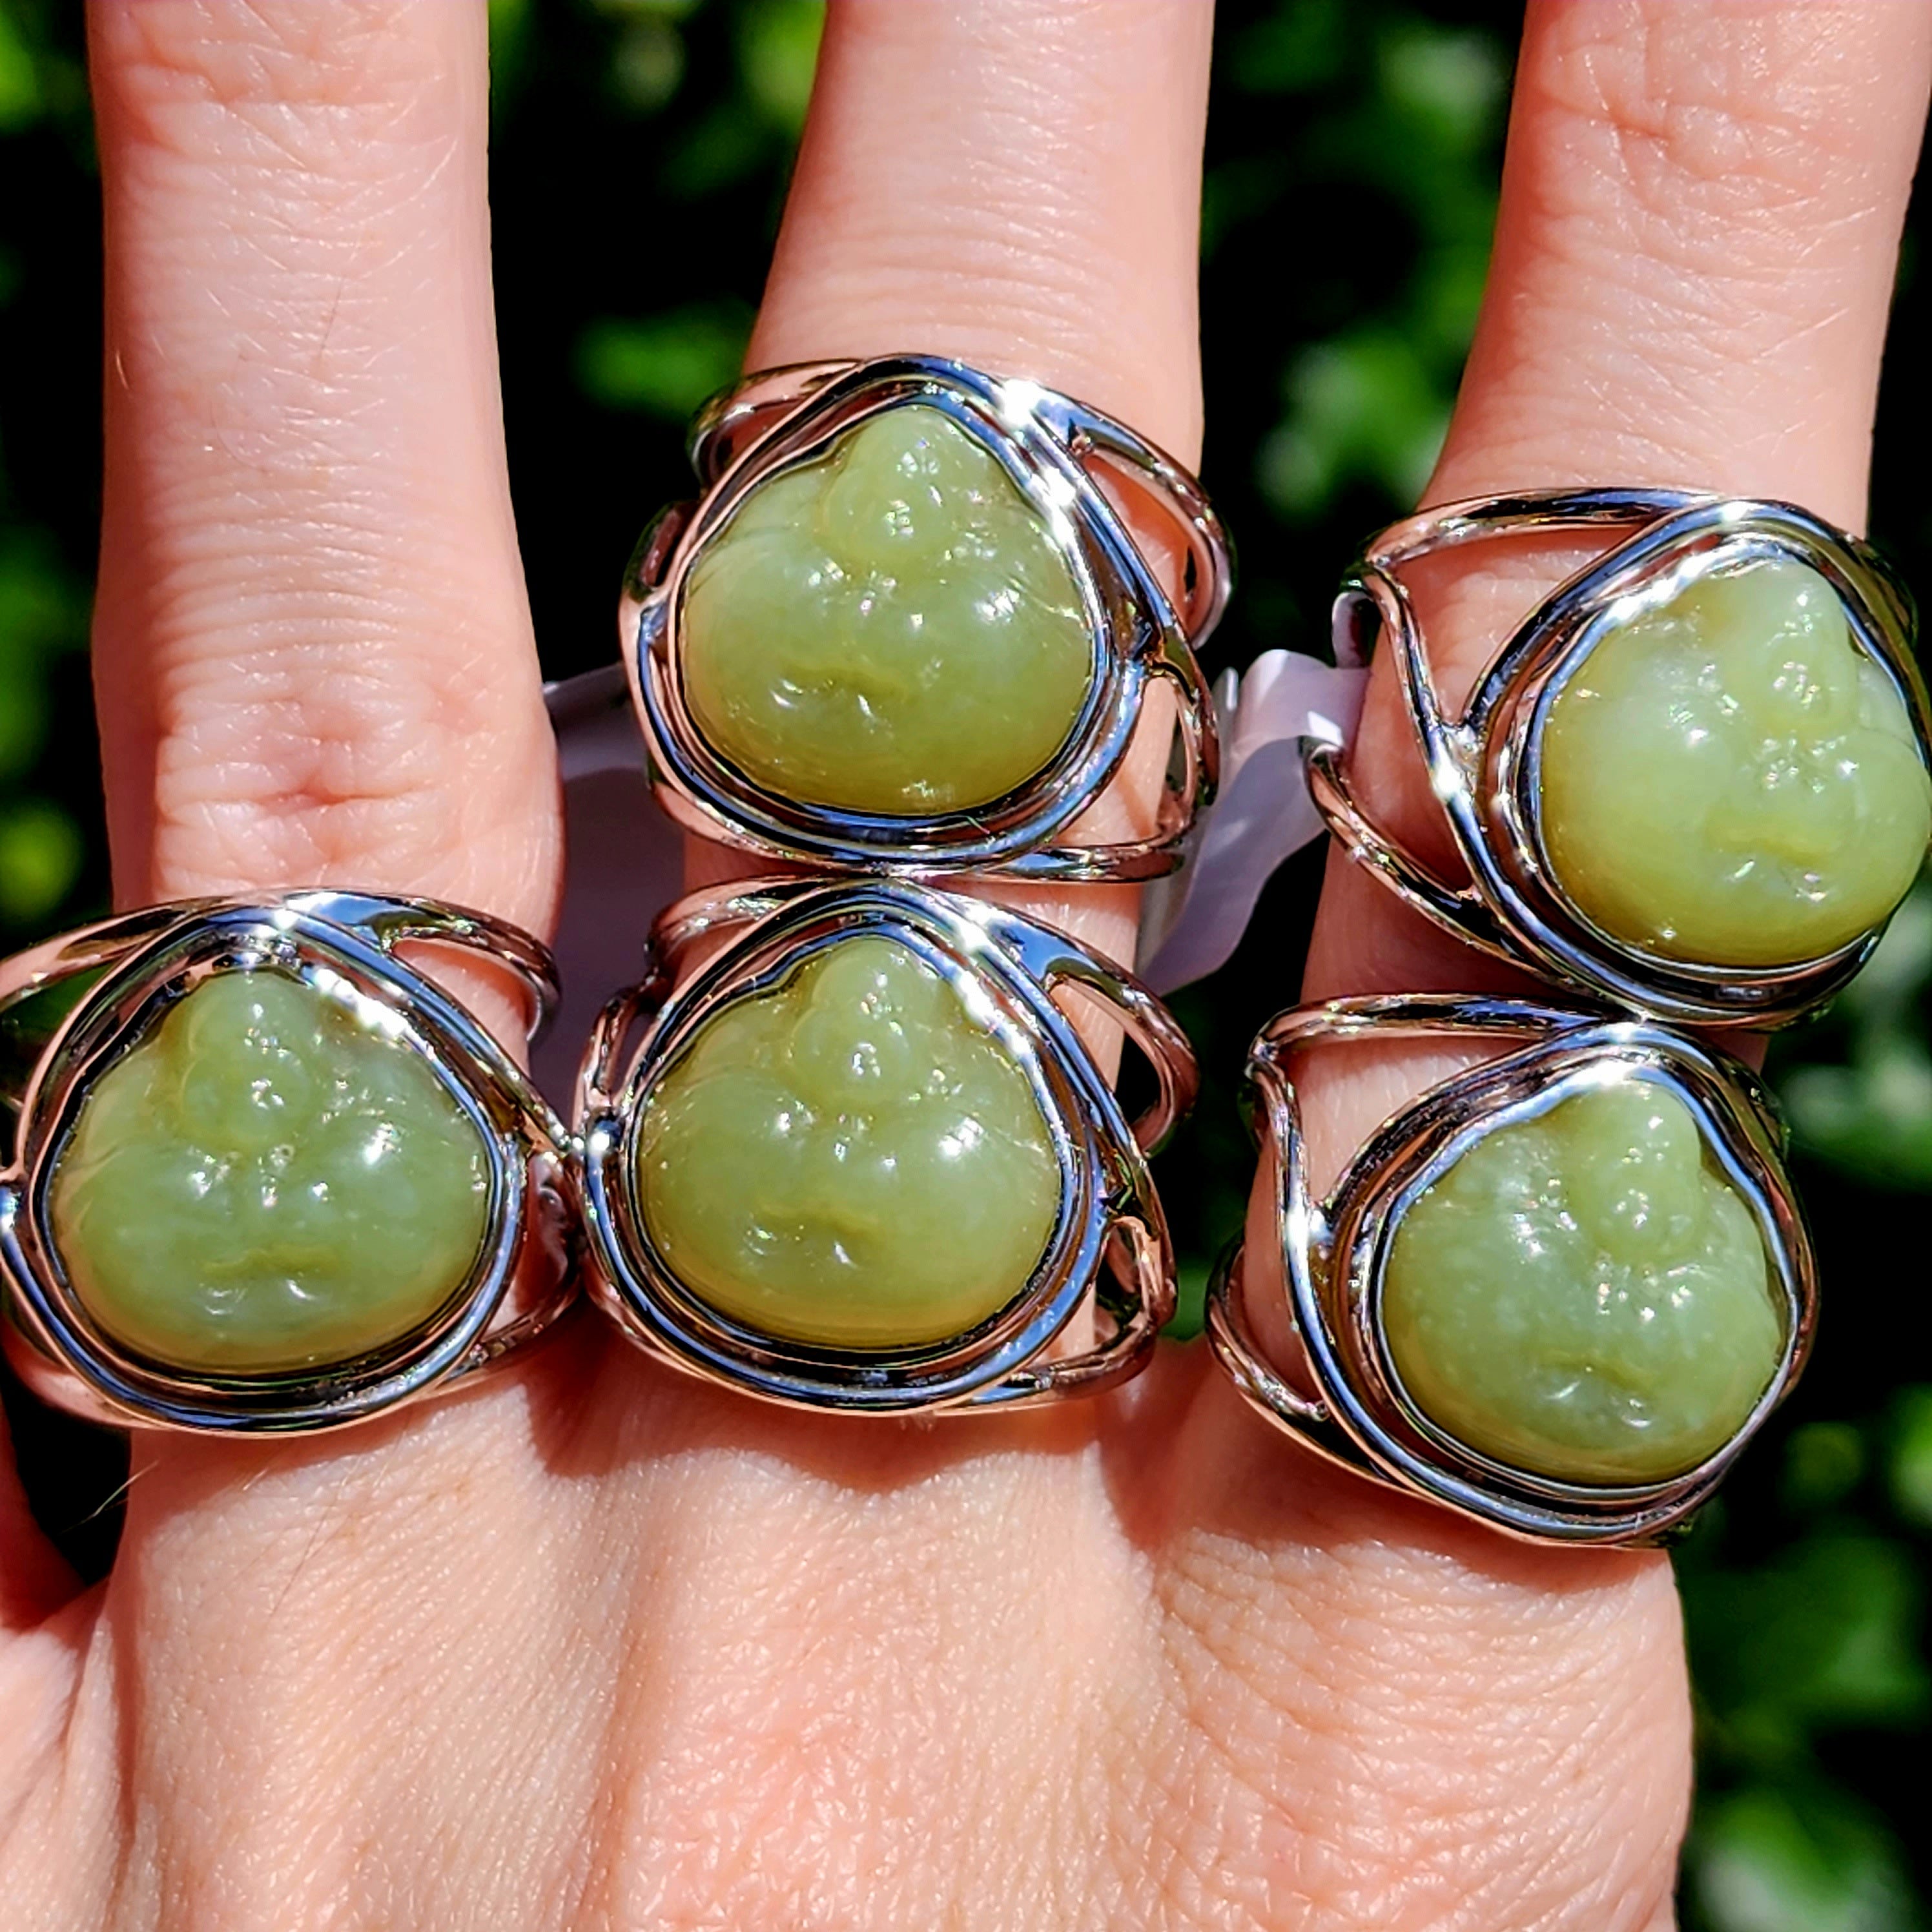 Jade Laughing Buddha Finger Cuff Adjustable Ring .925 Silver for Abundance, Good Luck, Joy and Protection